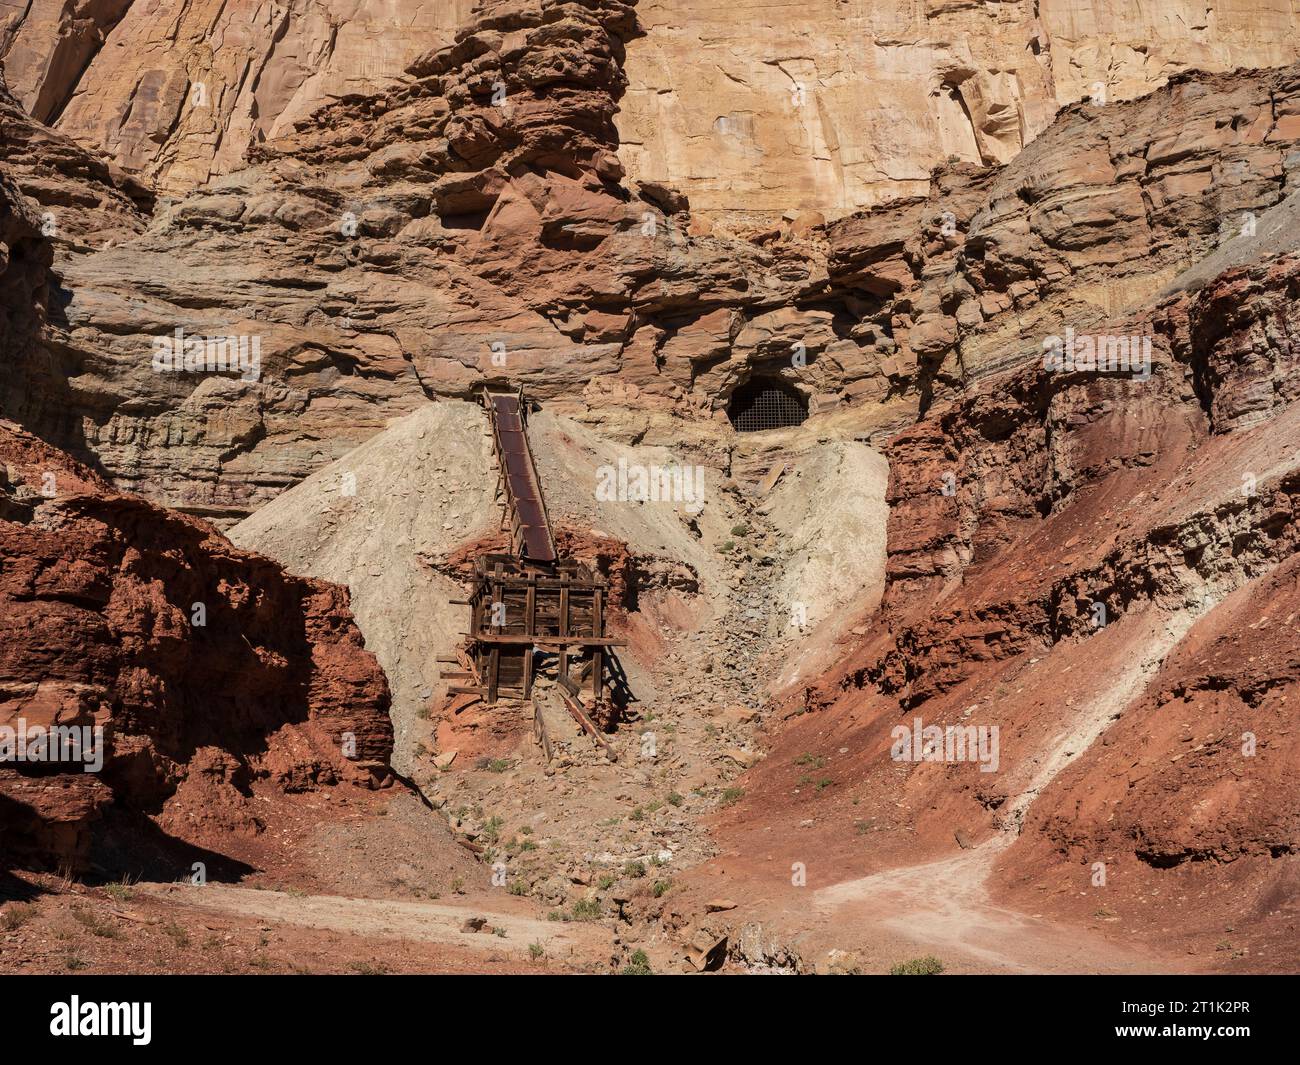 Remains of uranium mine, Tomsich Butte area off Reds Canyon Road. Stock Photo